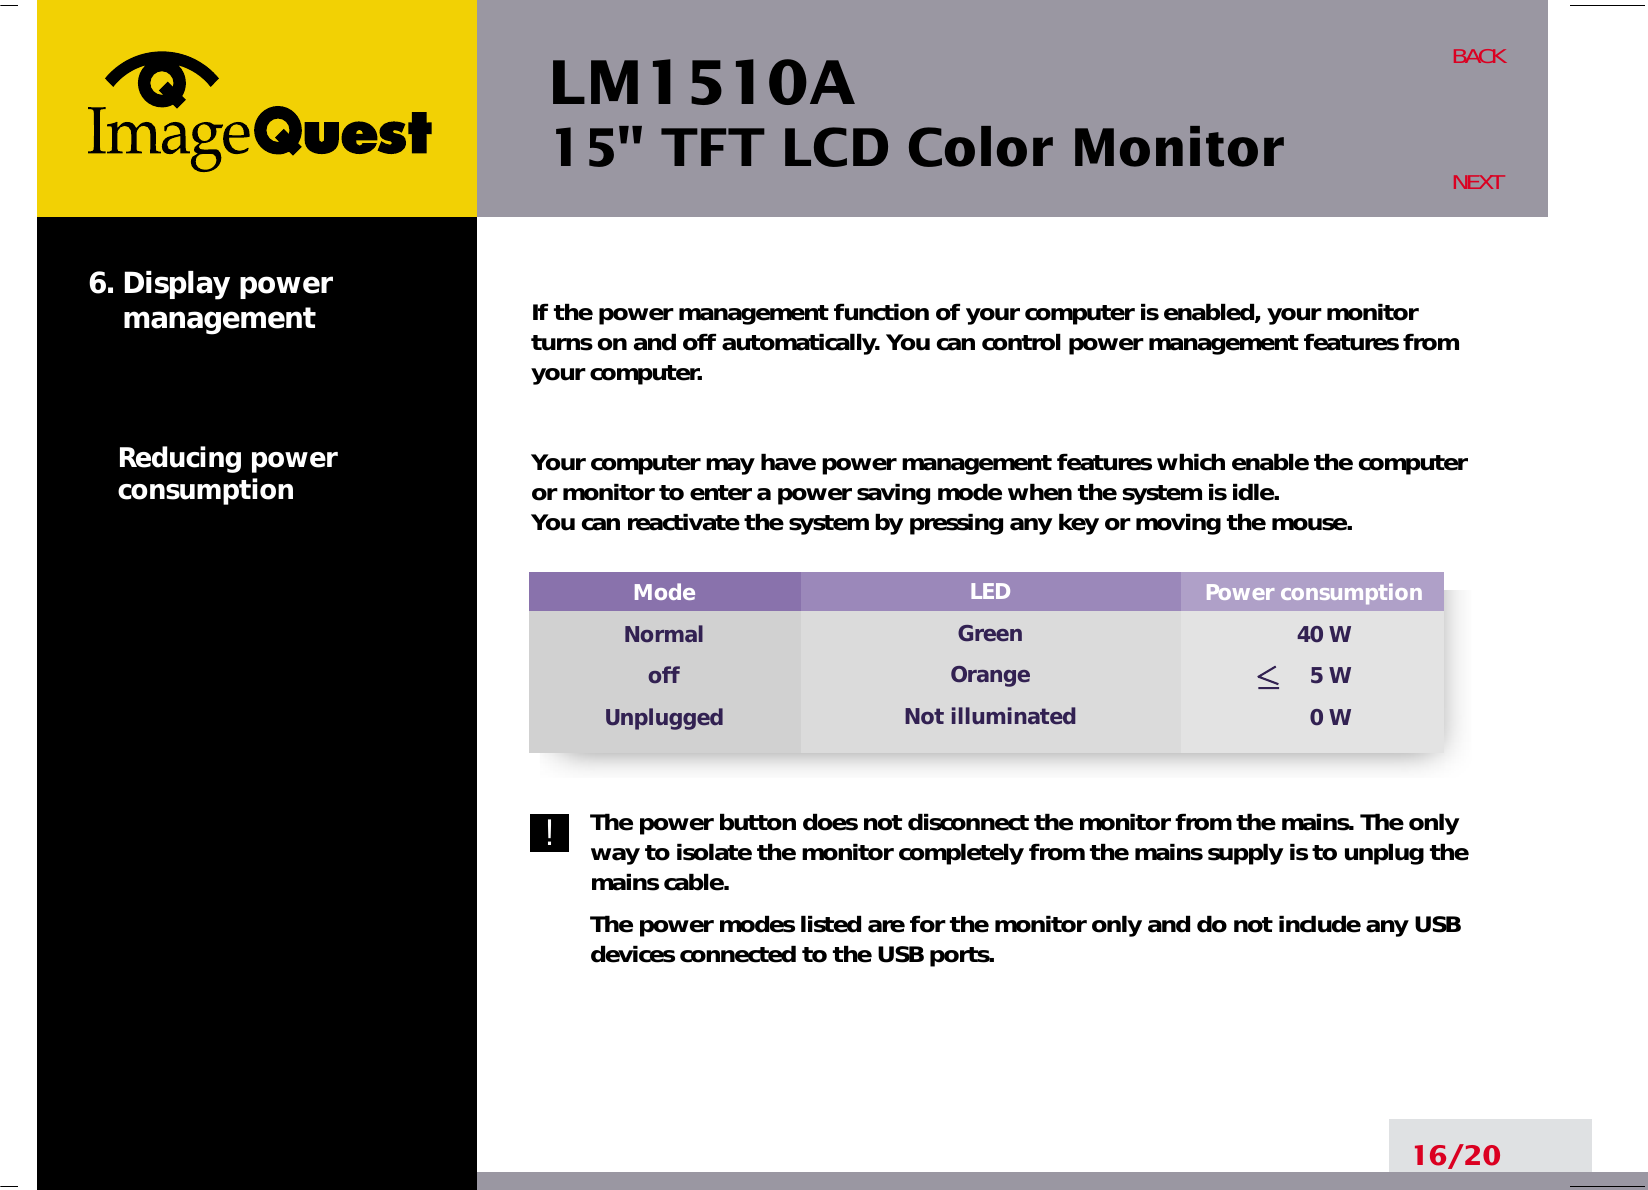 LM1510A15&quot; TFT LCD Color MonitorIf the power management function of your computer is enabled, your monitorturns on and off automatically. You can control power management features fromyour computer.Your computer may have power management features which enable the computeror monitor to enter a power saving mode when the system is idle. You can reactivate the system by pressing any key or moving the mouse.The power button does not disconnect the monitor from the mains. The onlyway to isolate the monitor completely from the mains supply is to unplug themains cable.The power modes listed are for the monitor only and do not include any USBdevices connected to the USB ports.16/20BACKNEXT6. Display power    managementReducing powerconsumptionPower consumption40 W5 W0 WModeNormaloffUnpluggedLEDGreenOrangeNot illuminated!